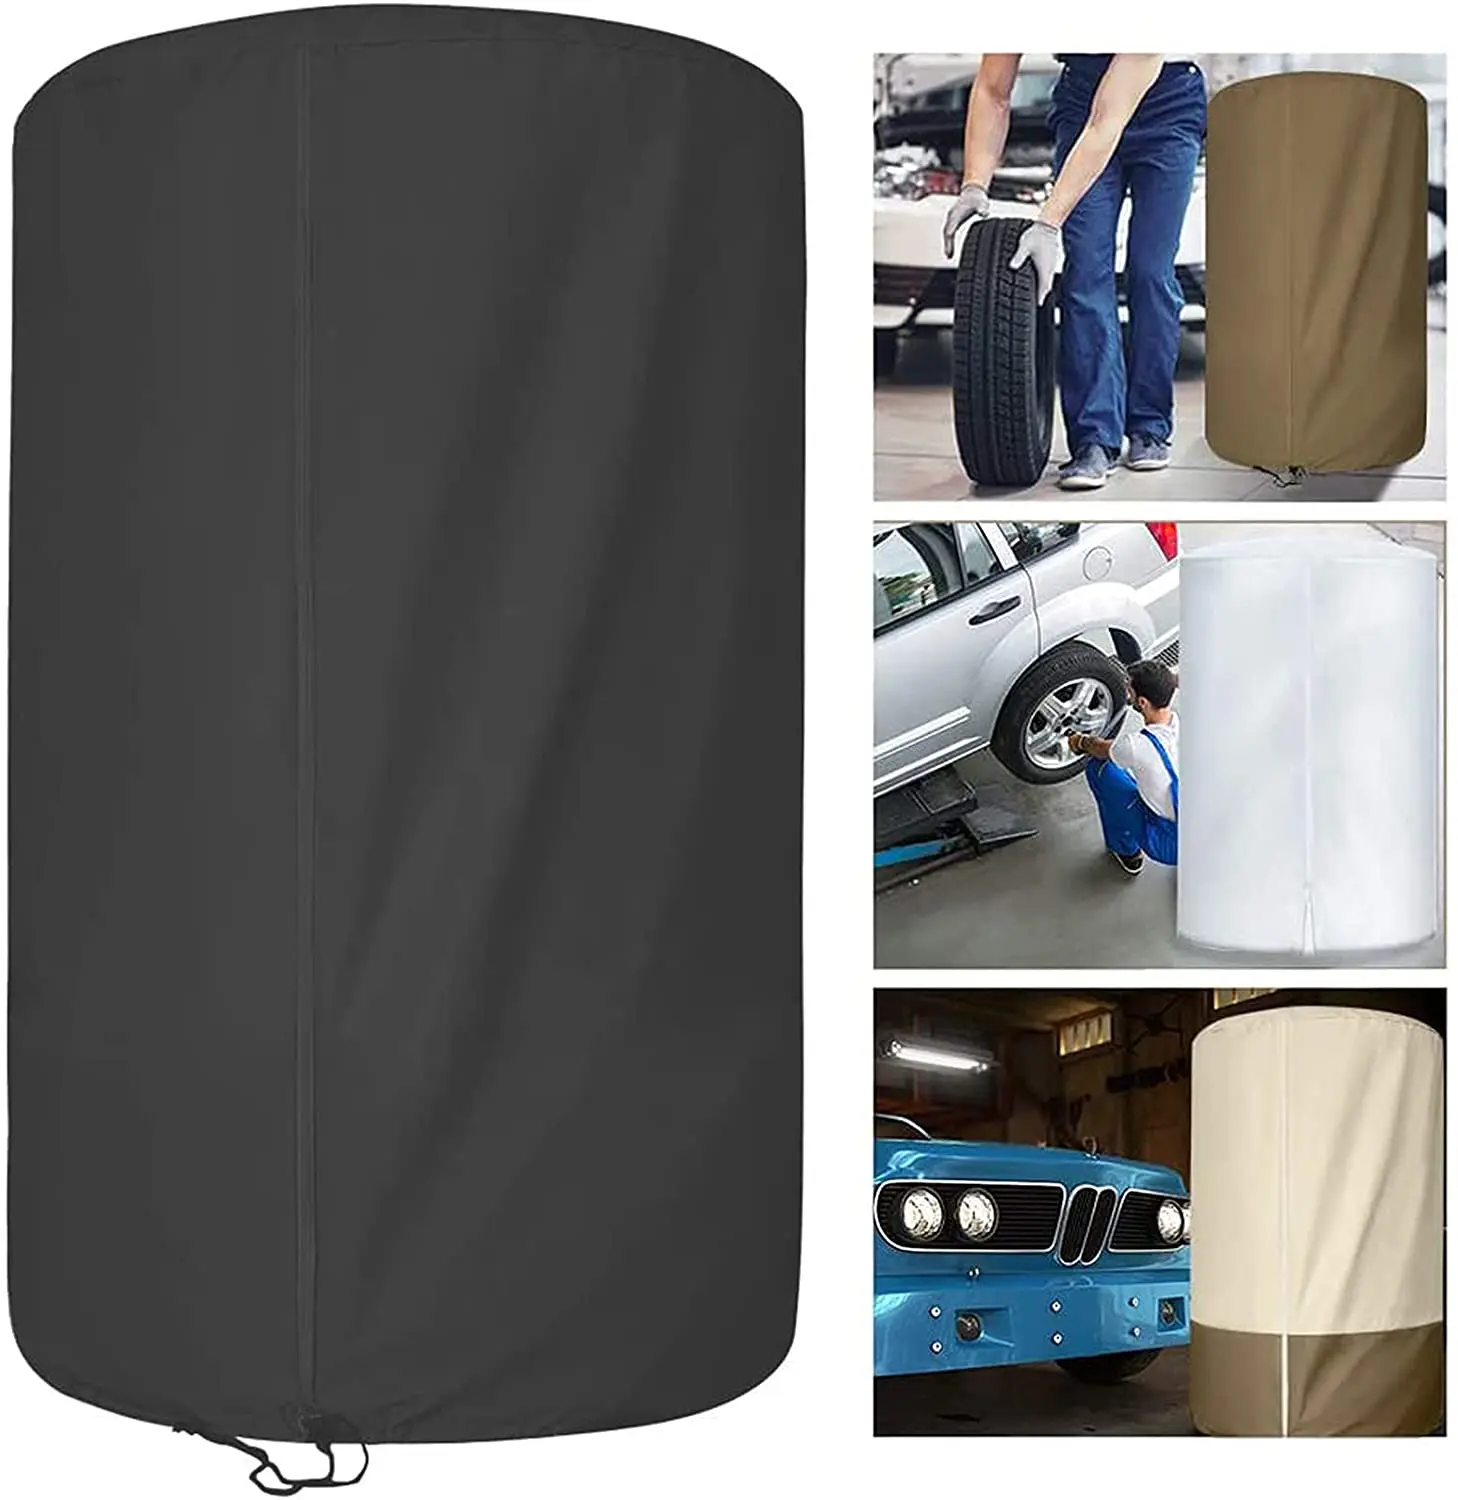 Tire Cover Waterproof Durable Tire Storage Bag Car Spare Tire Cover Oxford Polyester Fabric Cover Suit for Jeep,Trailer,RV,SUV,T